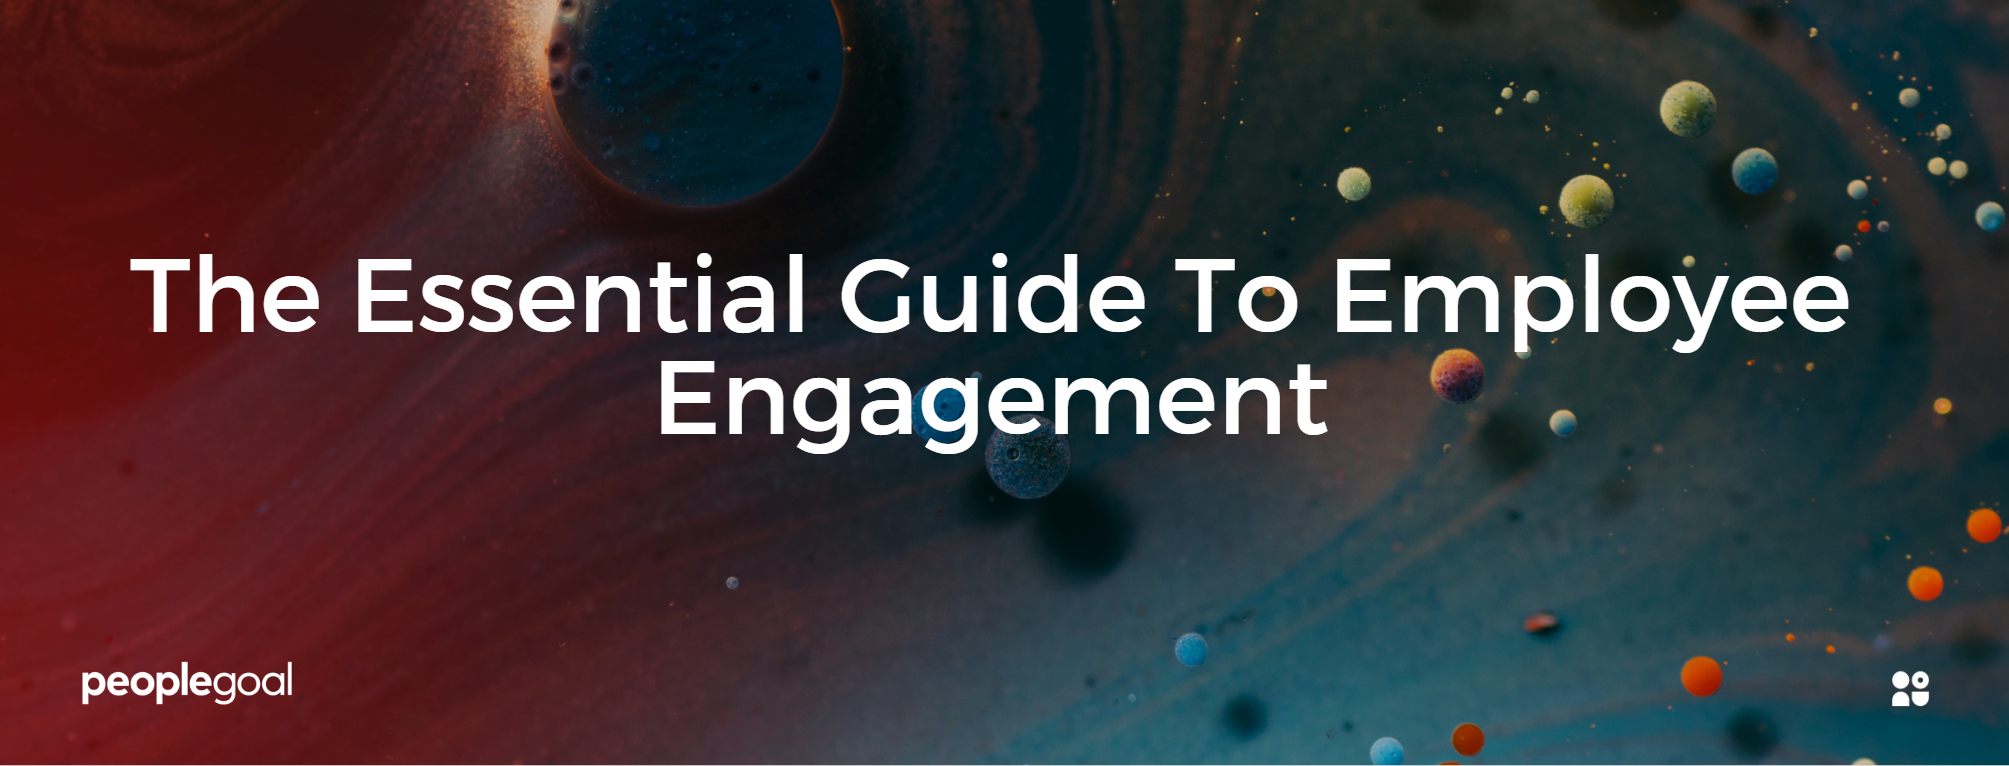 Employee engagement is directly linked to performance. Engaged employees are more suited to help an organization achieve its objectives. This guide will help you understand what is employee engagement.